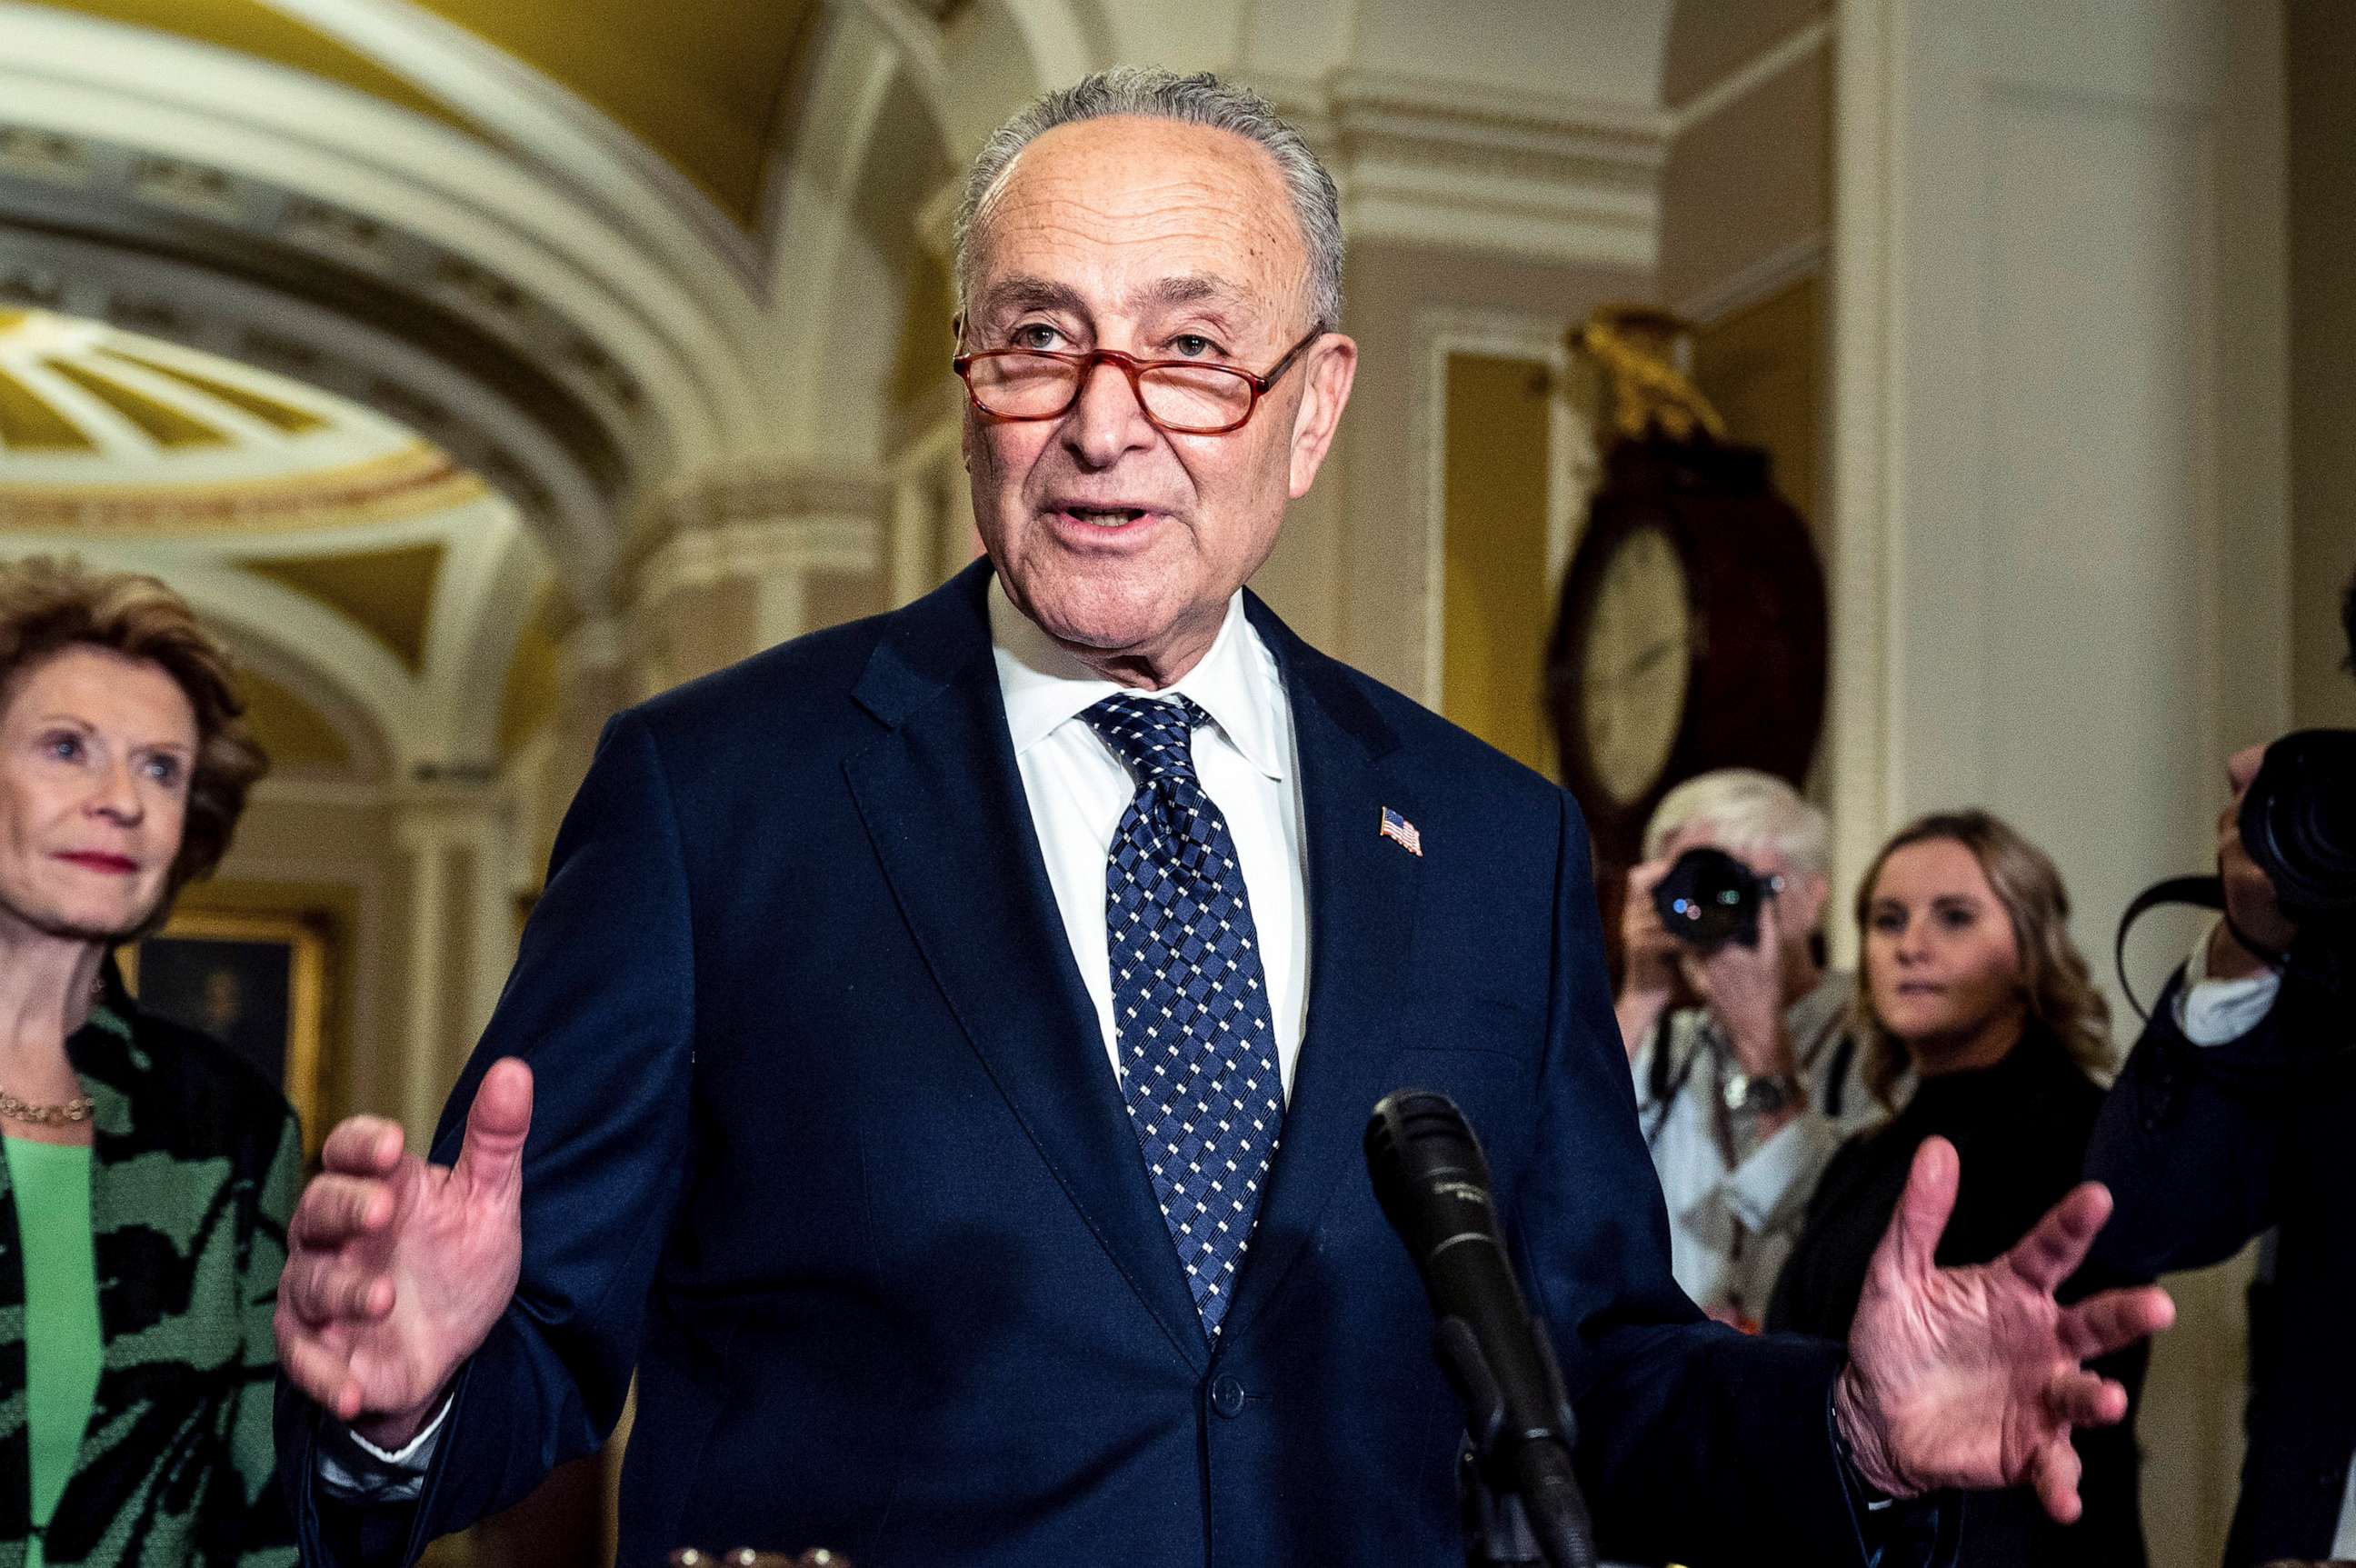 PHOTO: Chuck Schumer speaking at a press conference following Senate caucus policy luncheons at the U.S. Capitol., April 26, 2023.